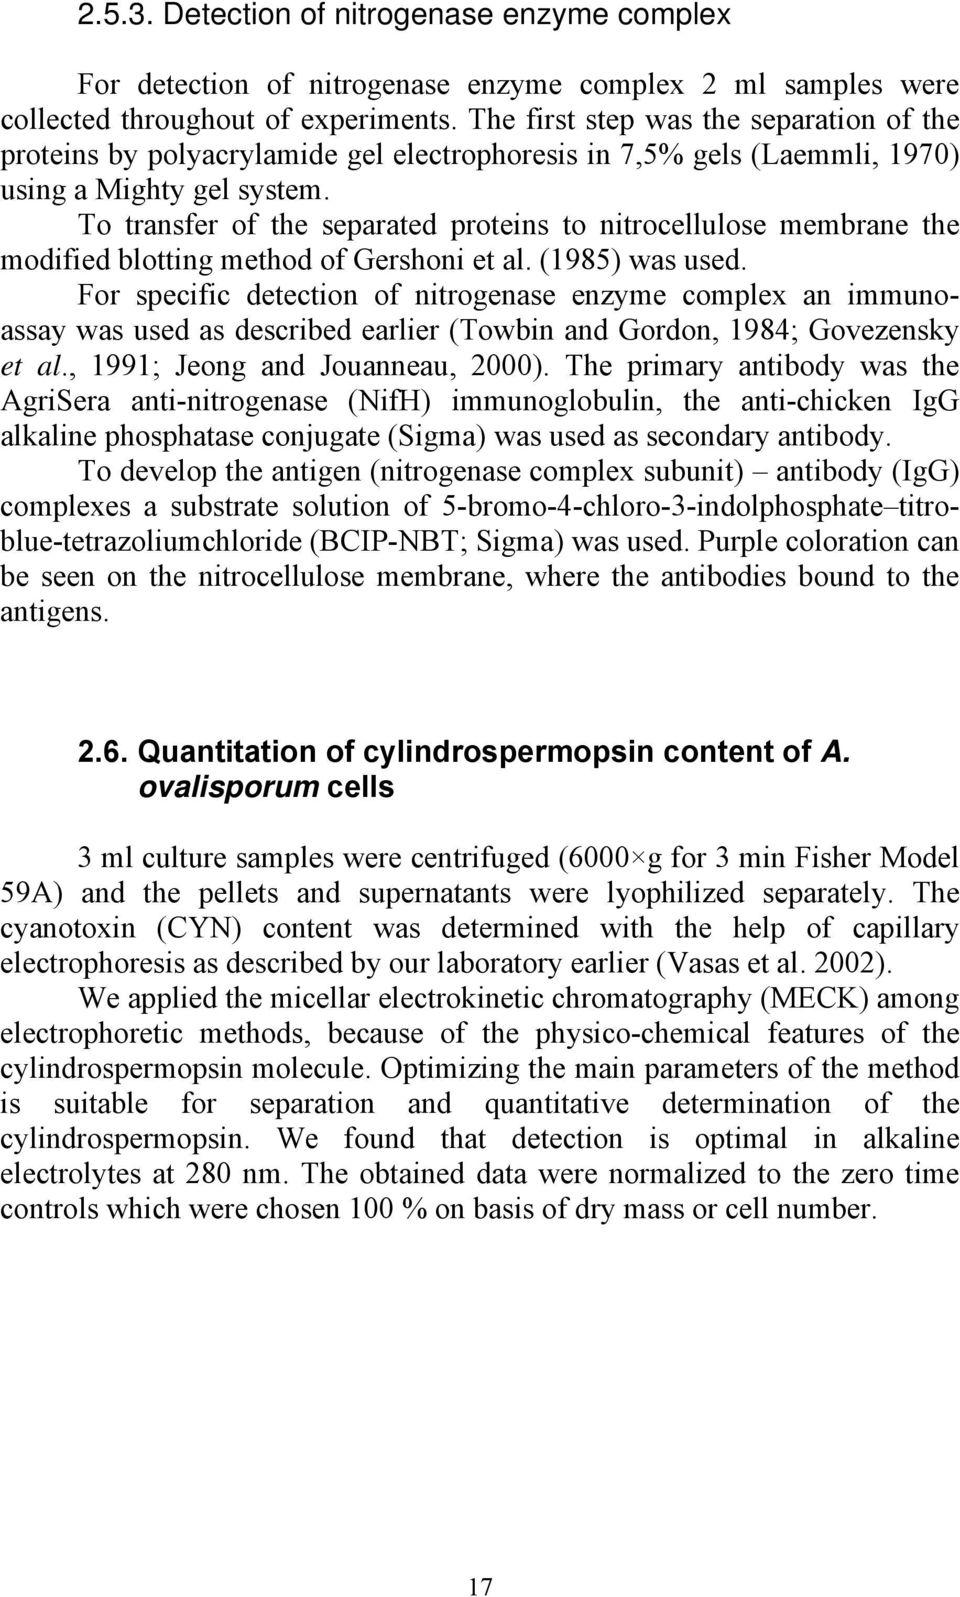 To transfer of the separated proteins to nitrocellulose membrane the modified blotting method of Gershoni et al. (1985) was used.